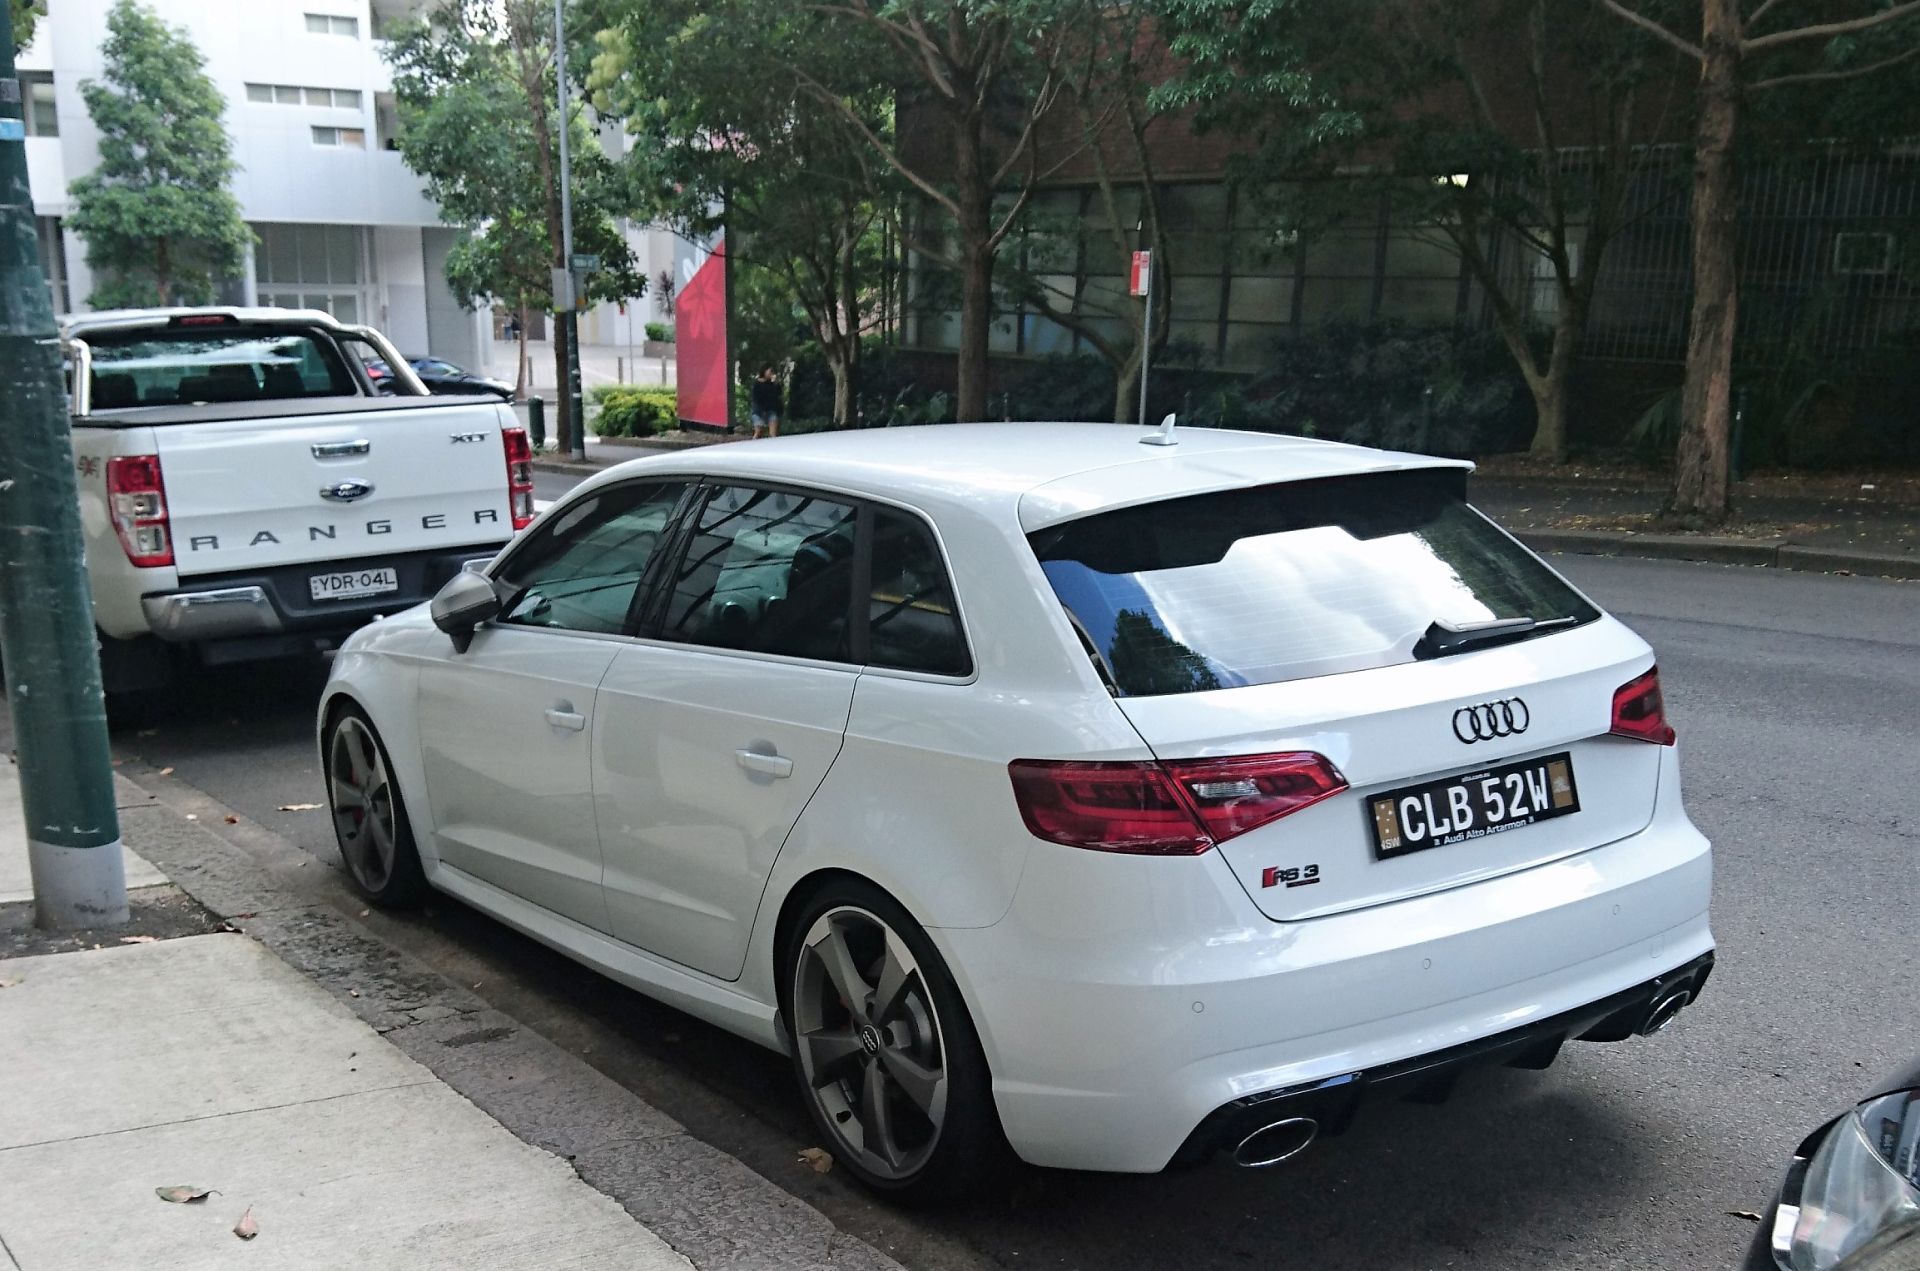 Stunning Wallpaper Of Audi Rs3 Parked By The Road - Audi Rs 6 - HD Wallpaper 